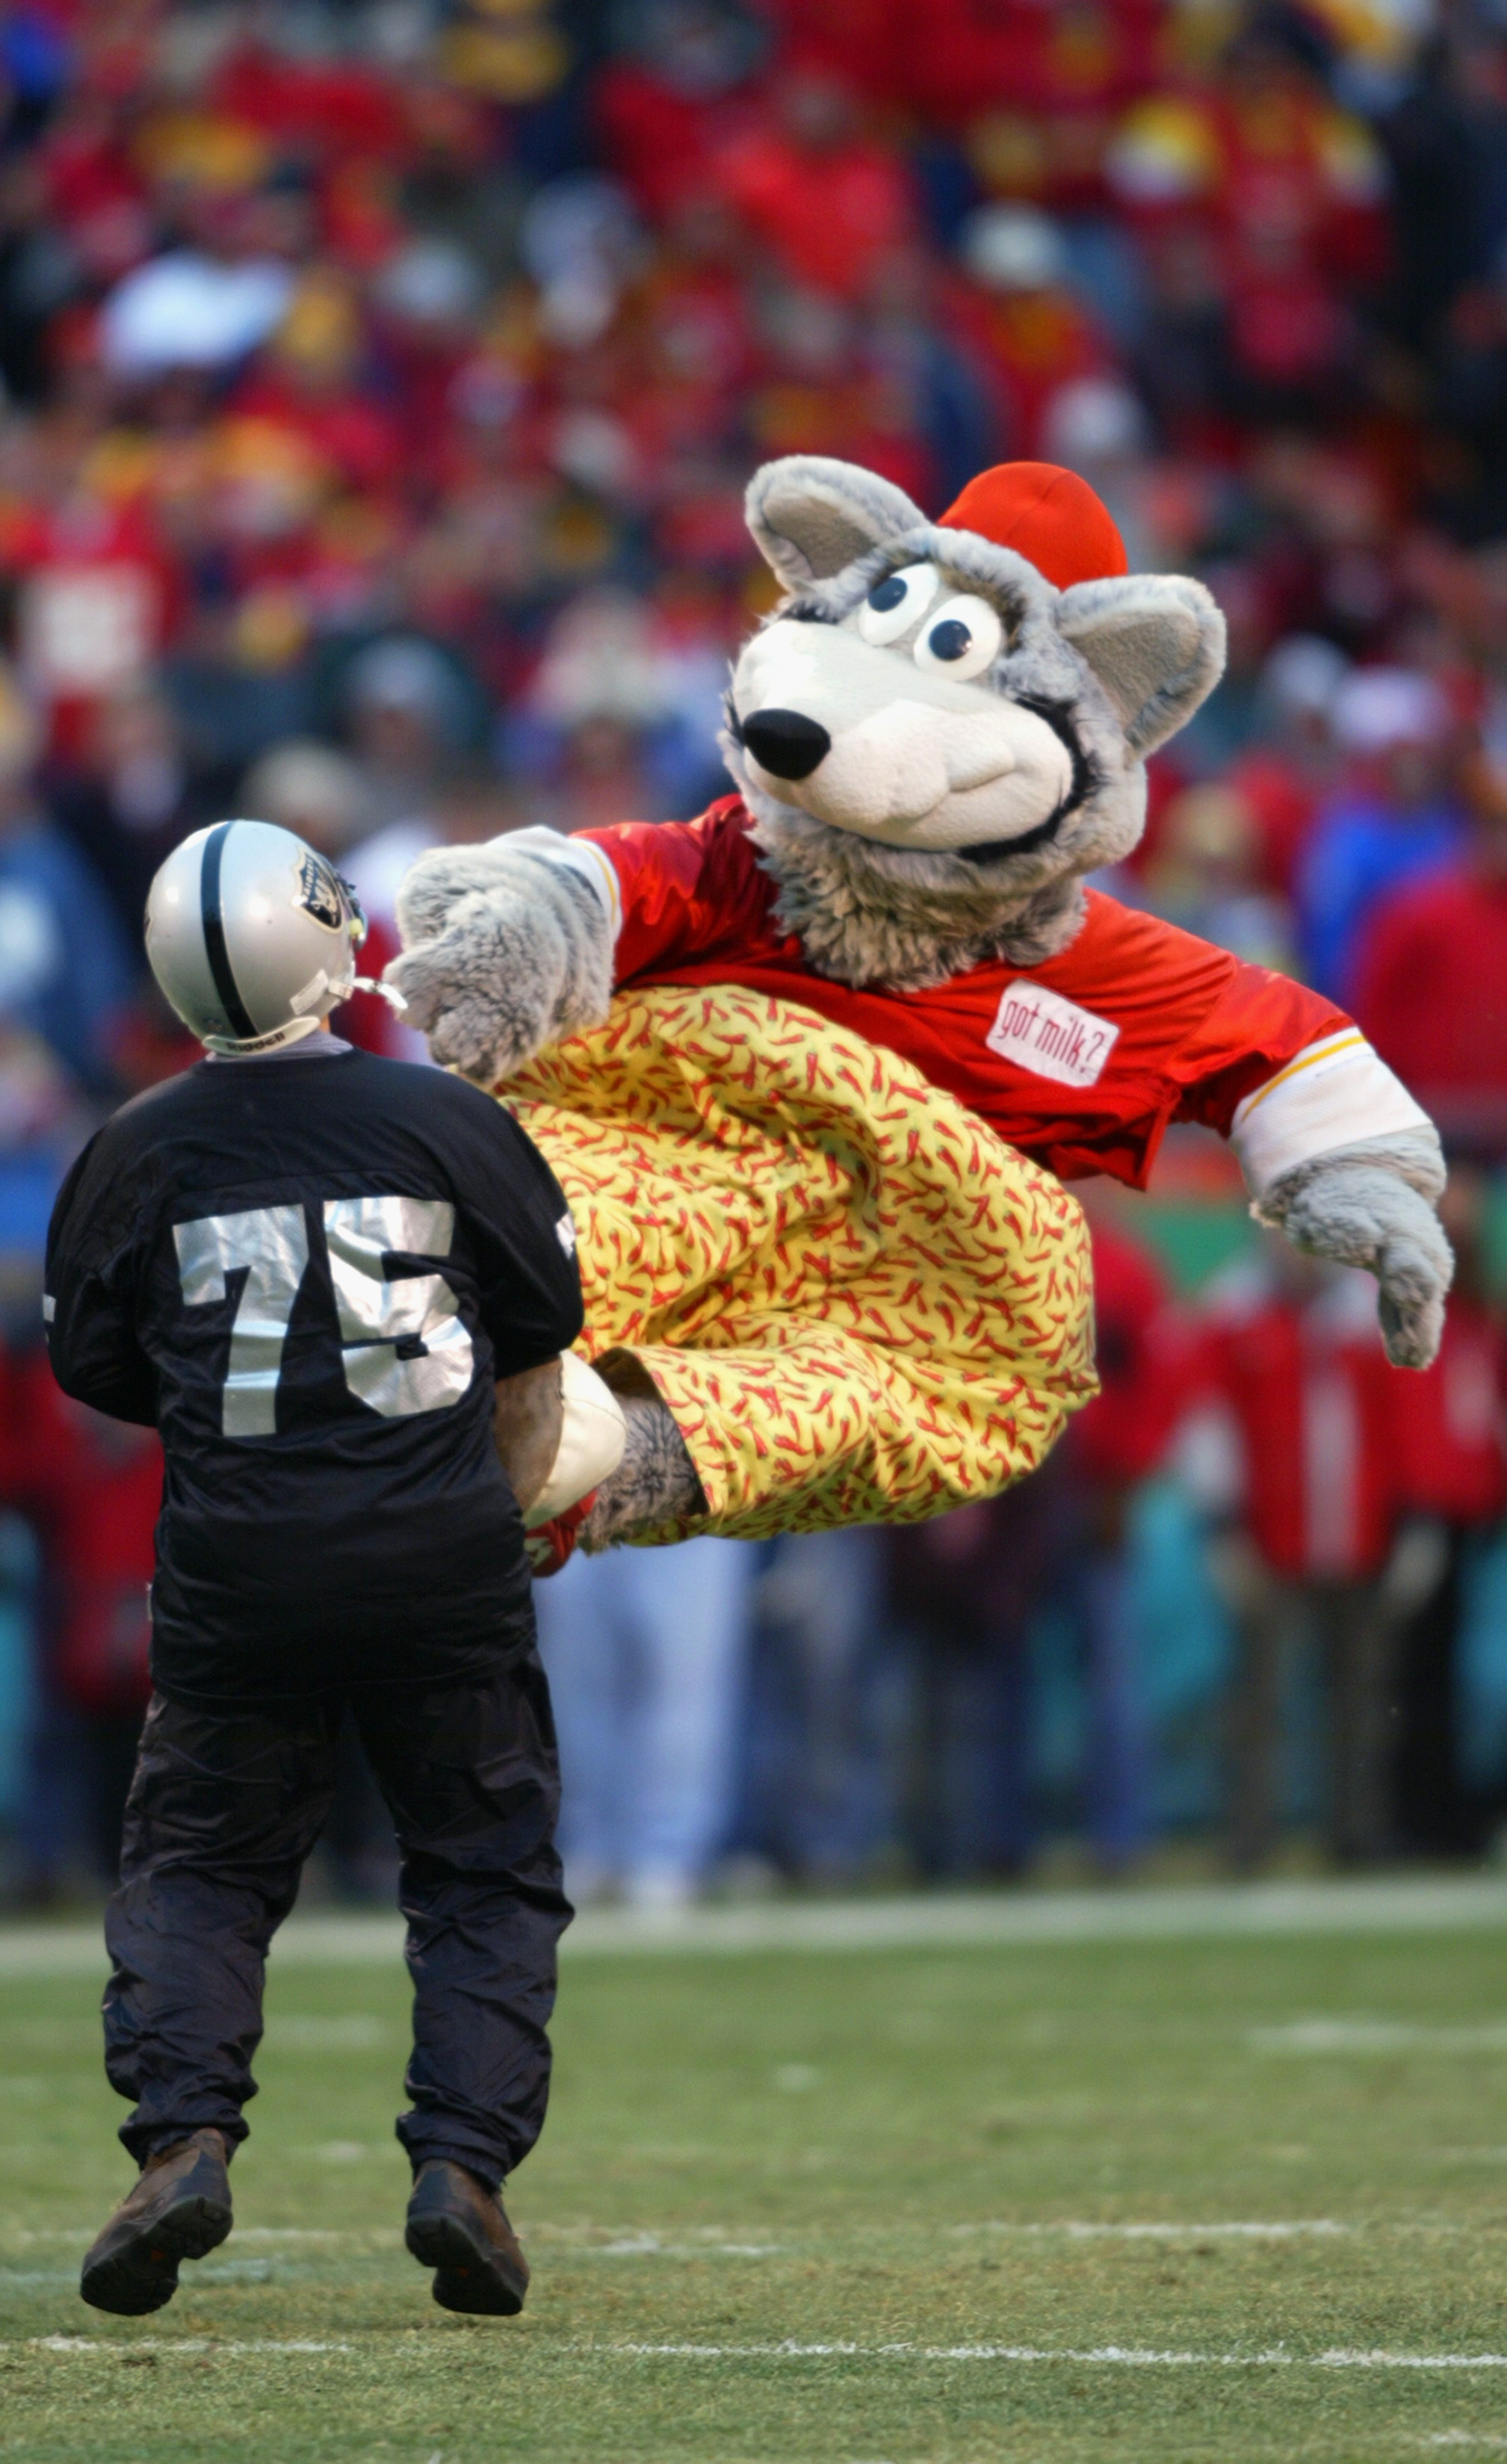 KC Chiefs mascot hurt during practice at Arrowhead